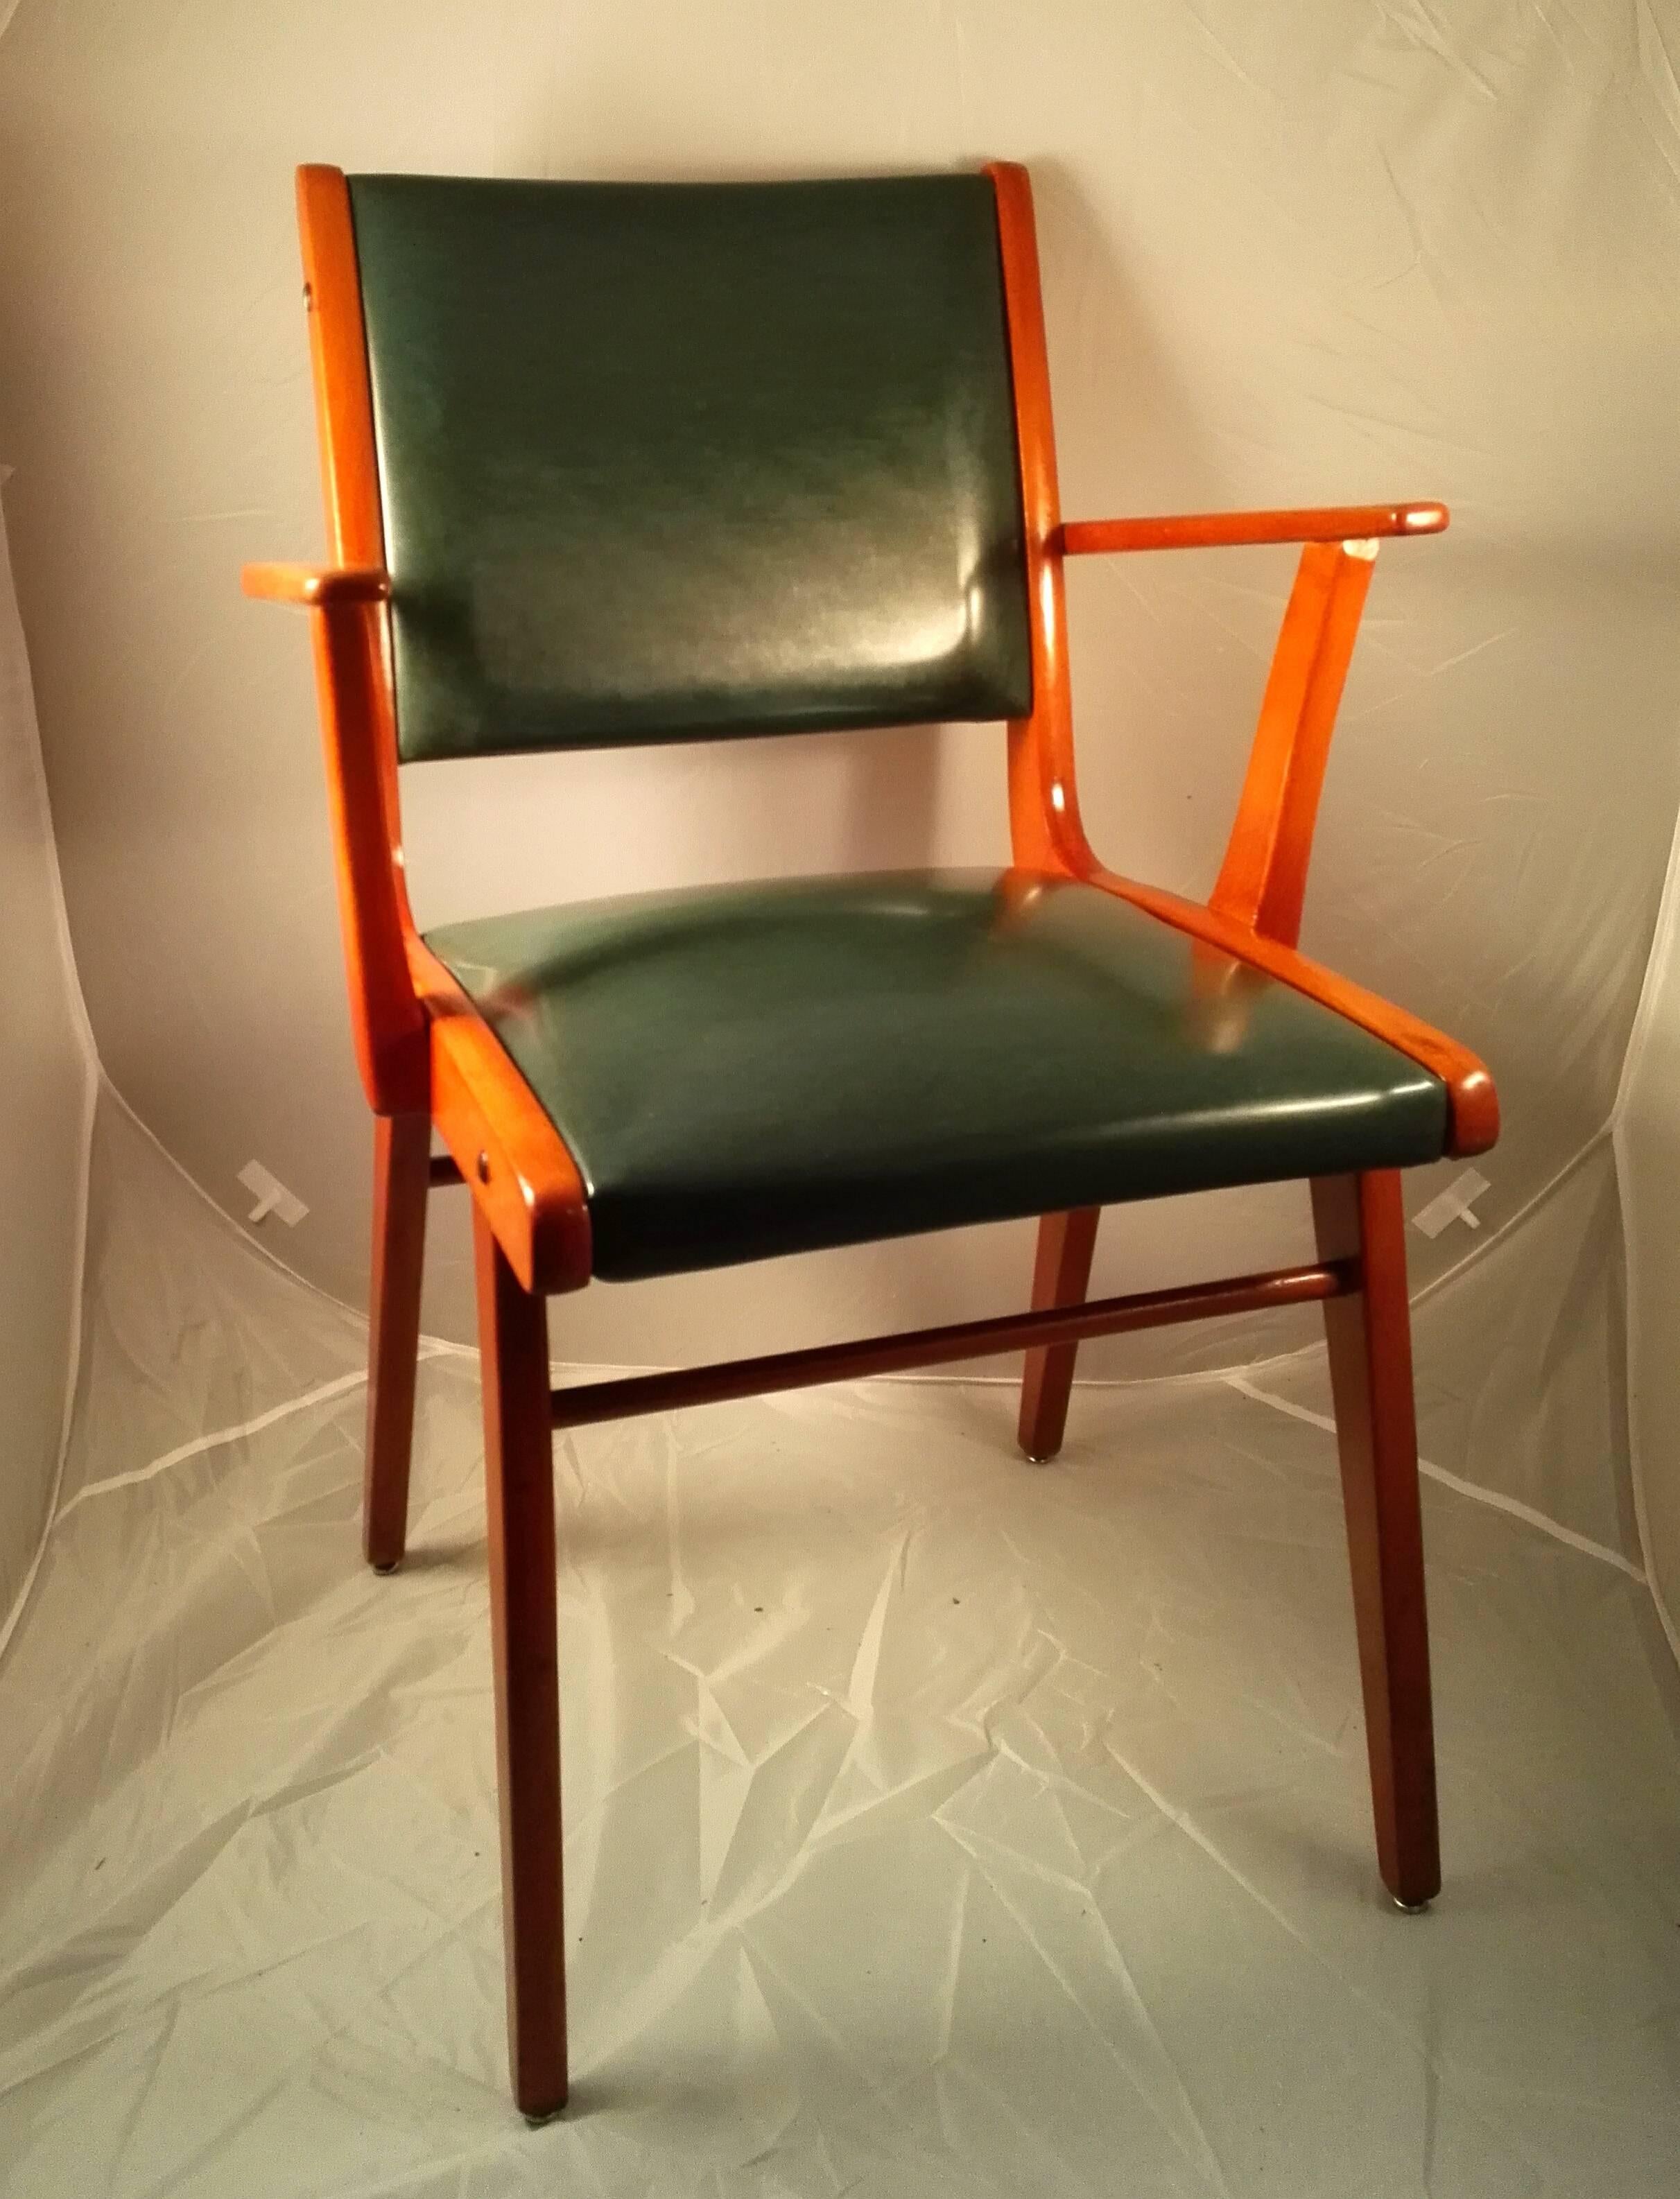 One of eight strong and in wonderful colored beechwood, hand polished Armchairs from circa 1940! With green (British racing green), upholstery!